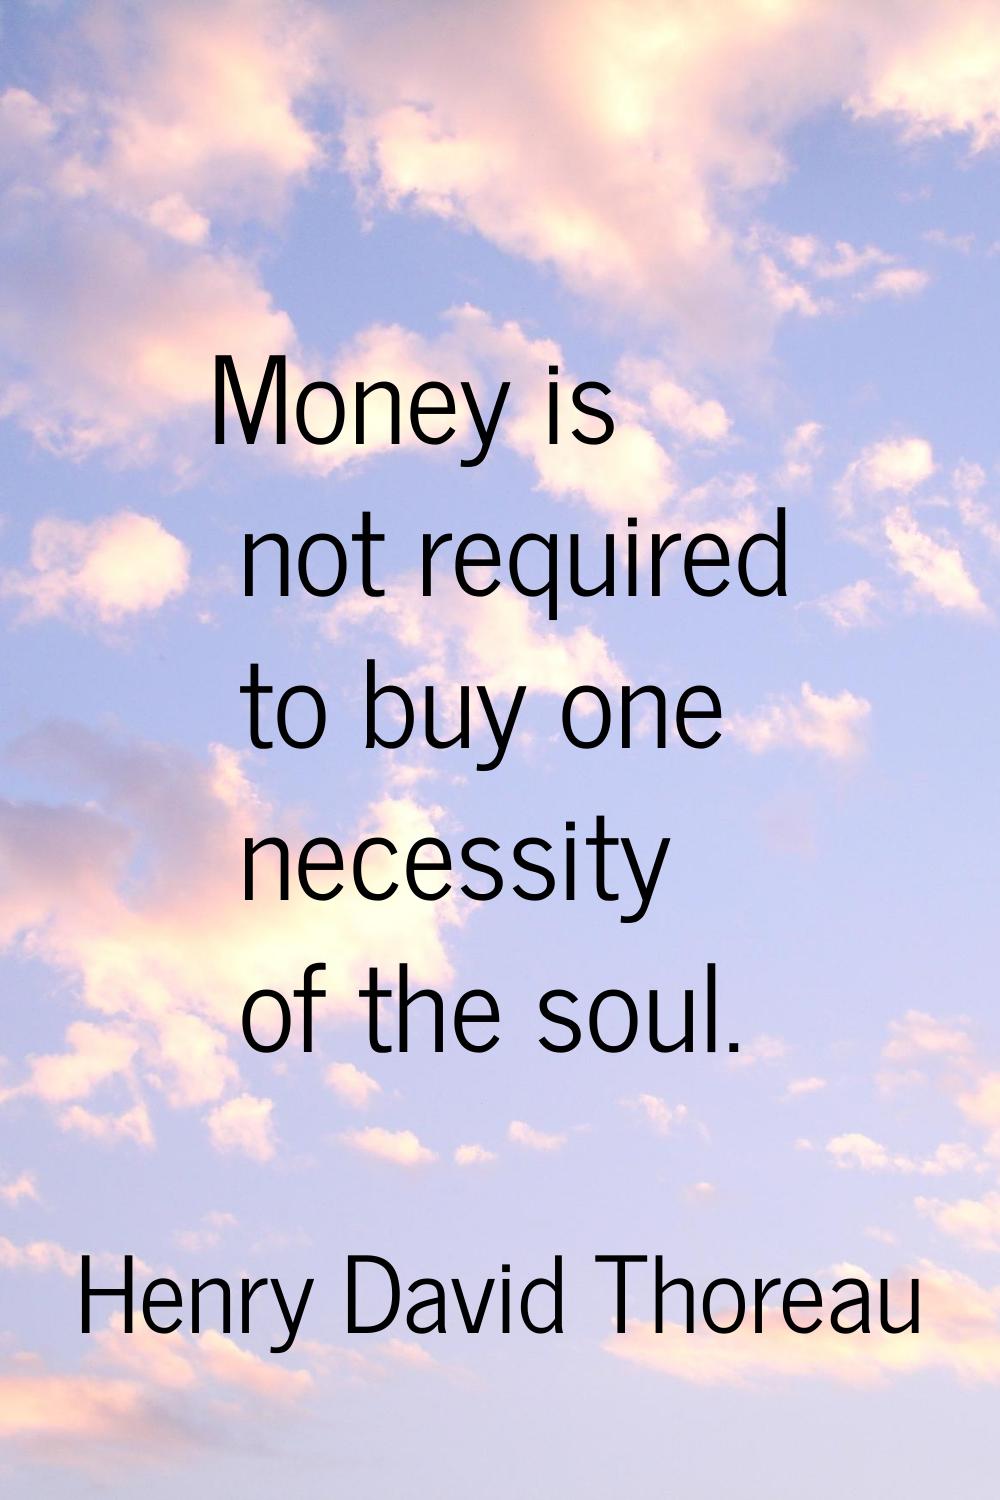 Money is not required to buy one necessity of the soul.